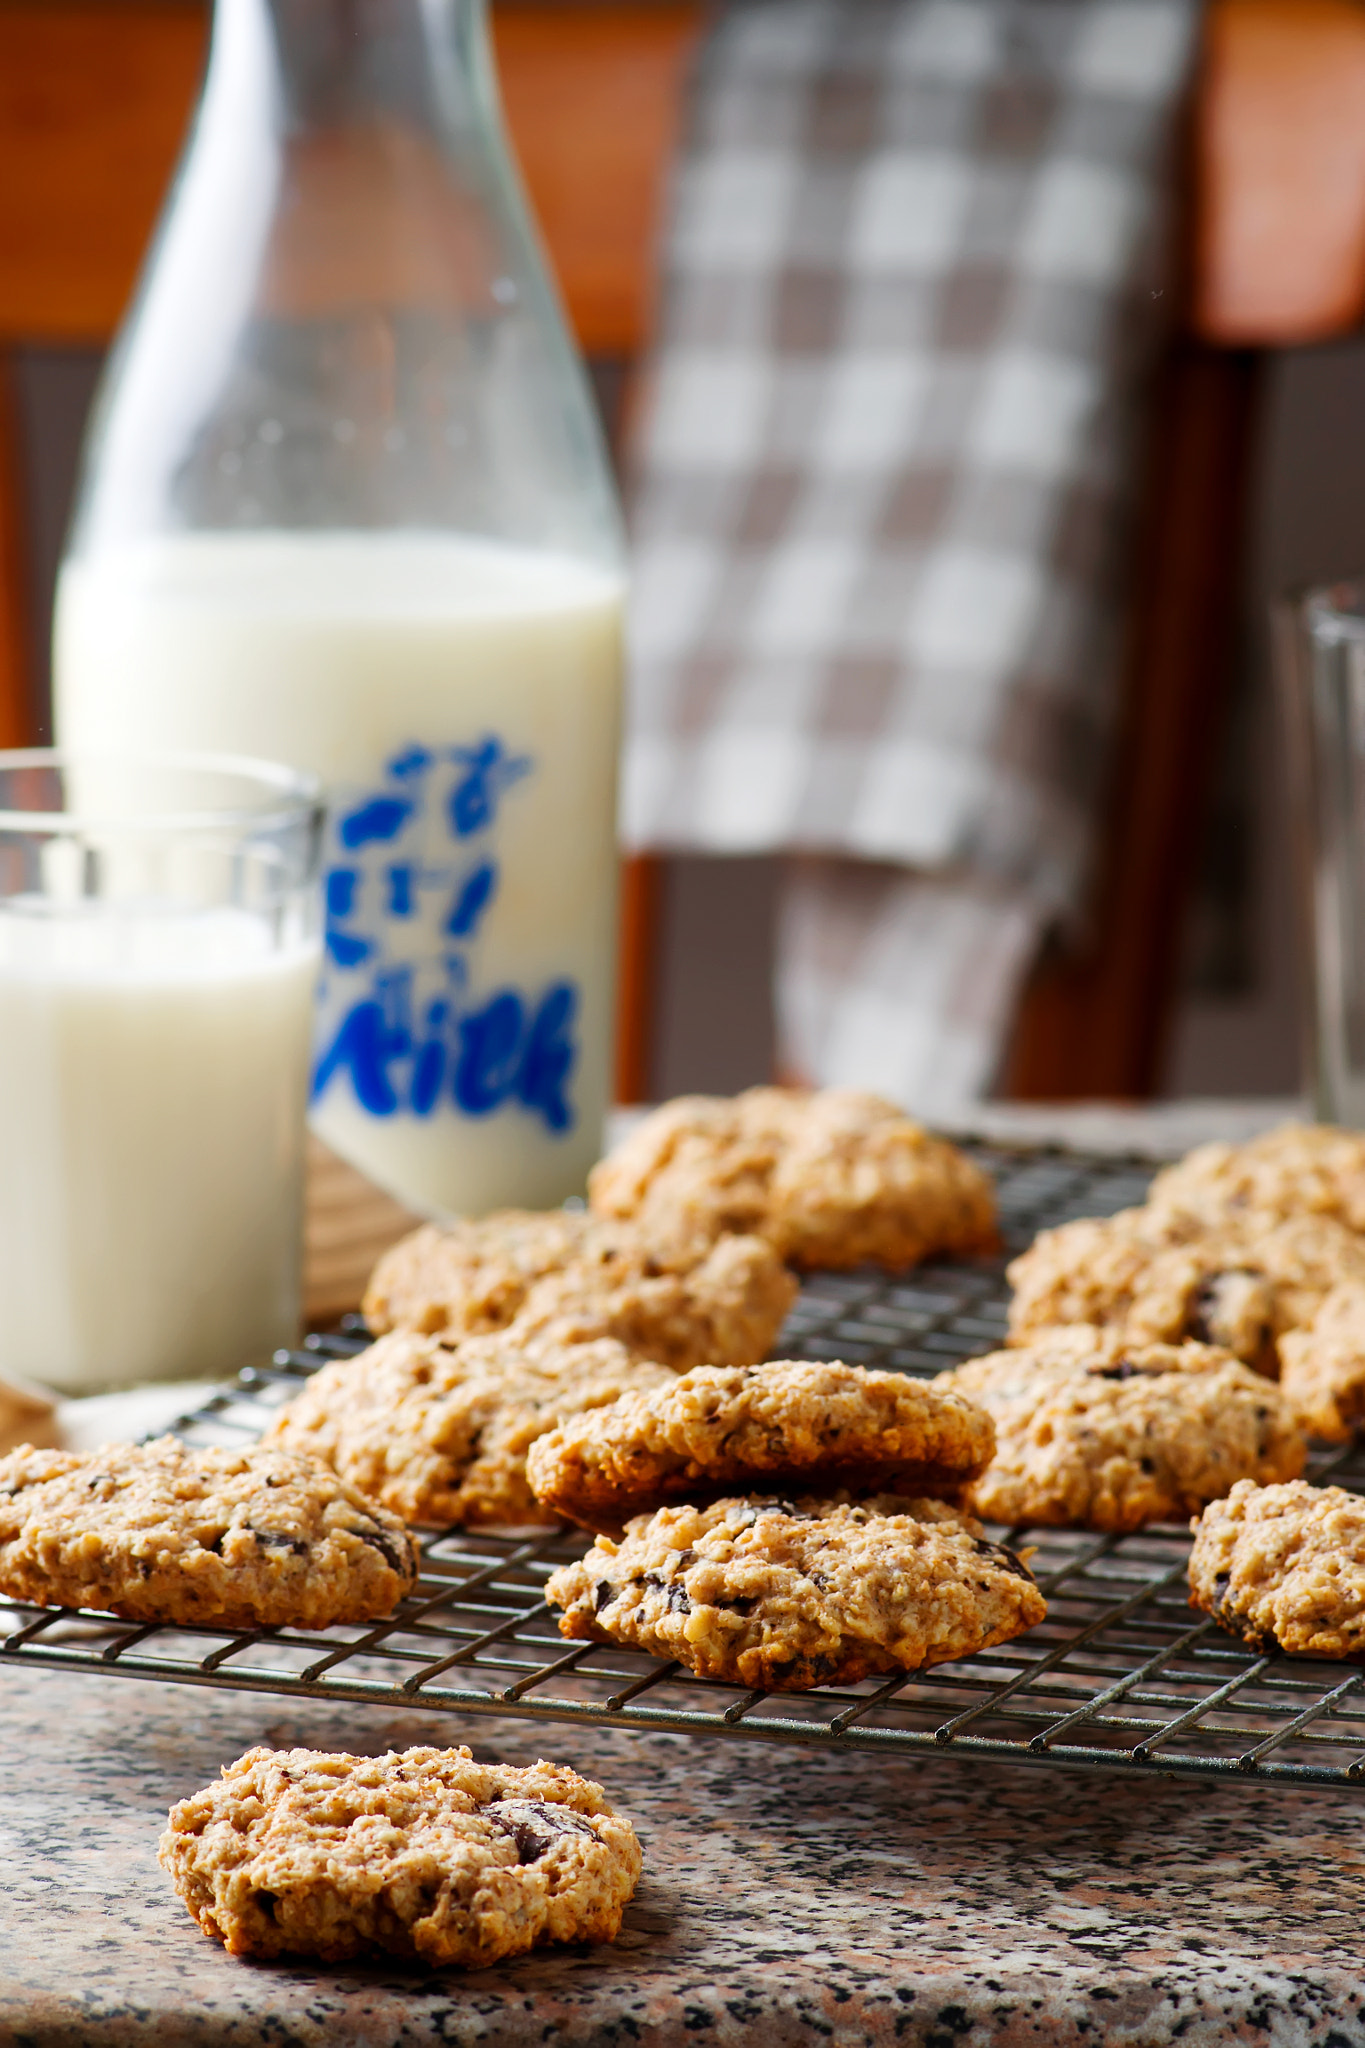 Nikon D3100 + Nikon AF-S Micro-Nikkor 105mm F2.8G IF-ED VR sample photo. Oatmeal chocolate chip cookies.style rustic photography